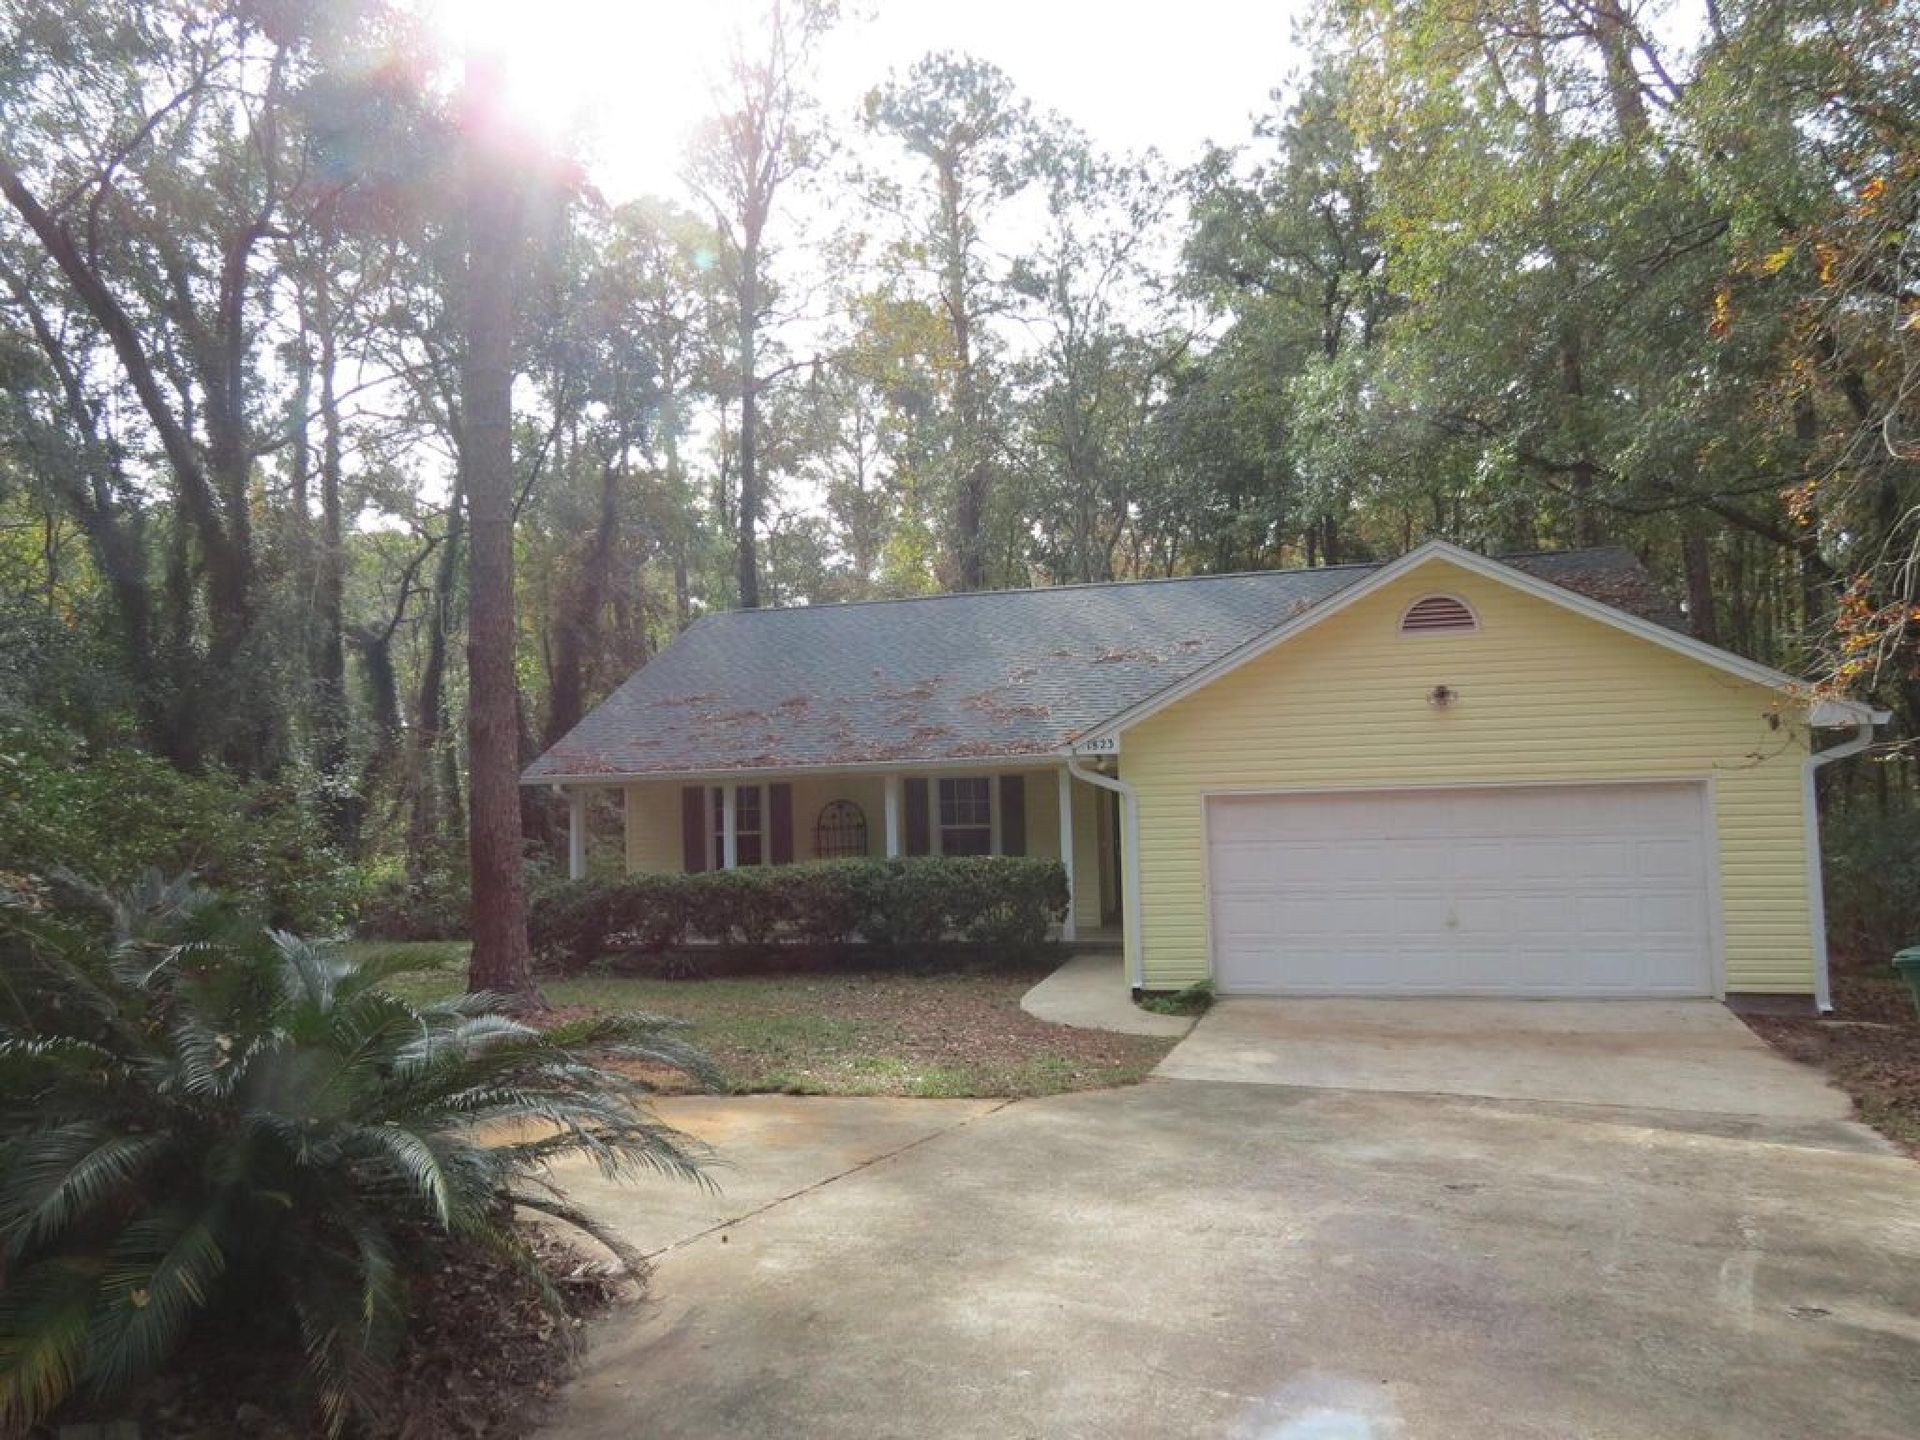 Photo of property: 698 Folkstone Rd, Tallahassee, FL 32312